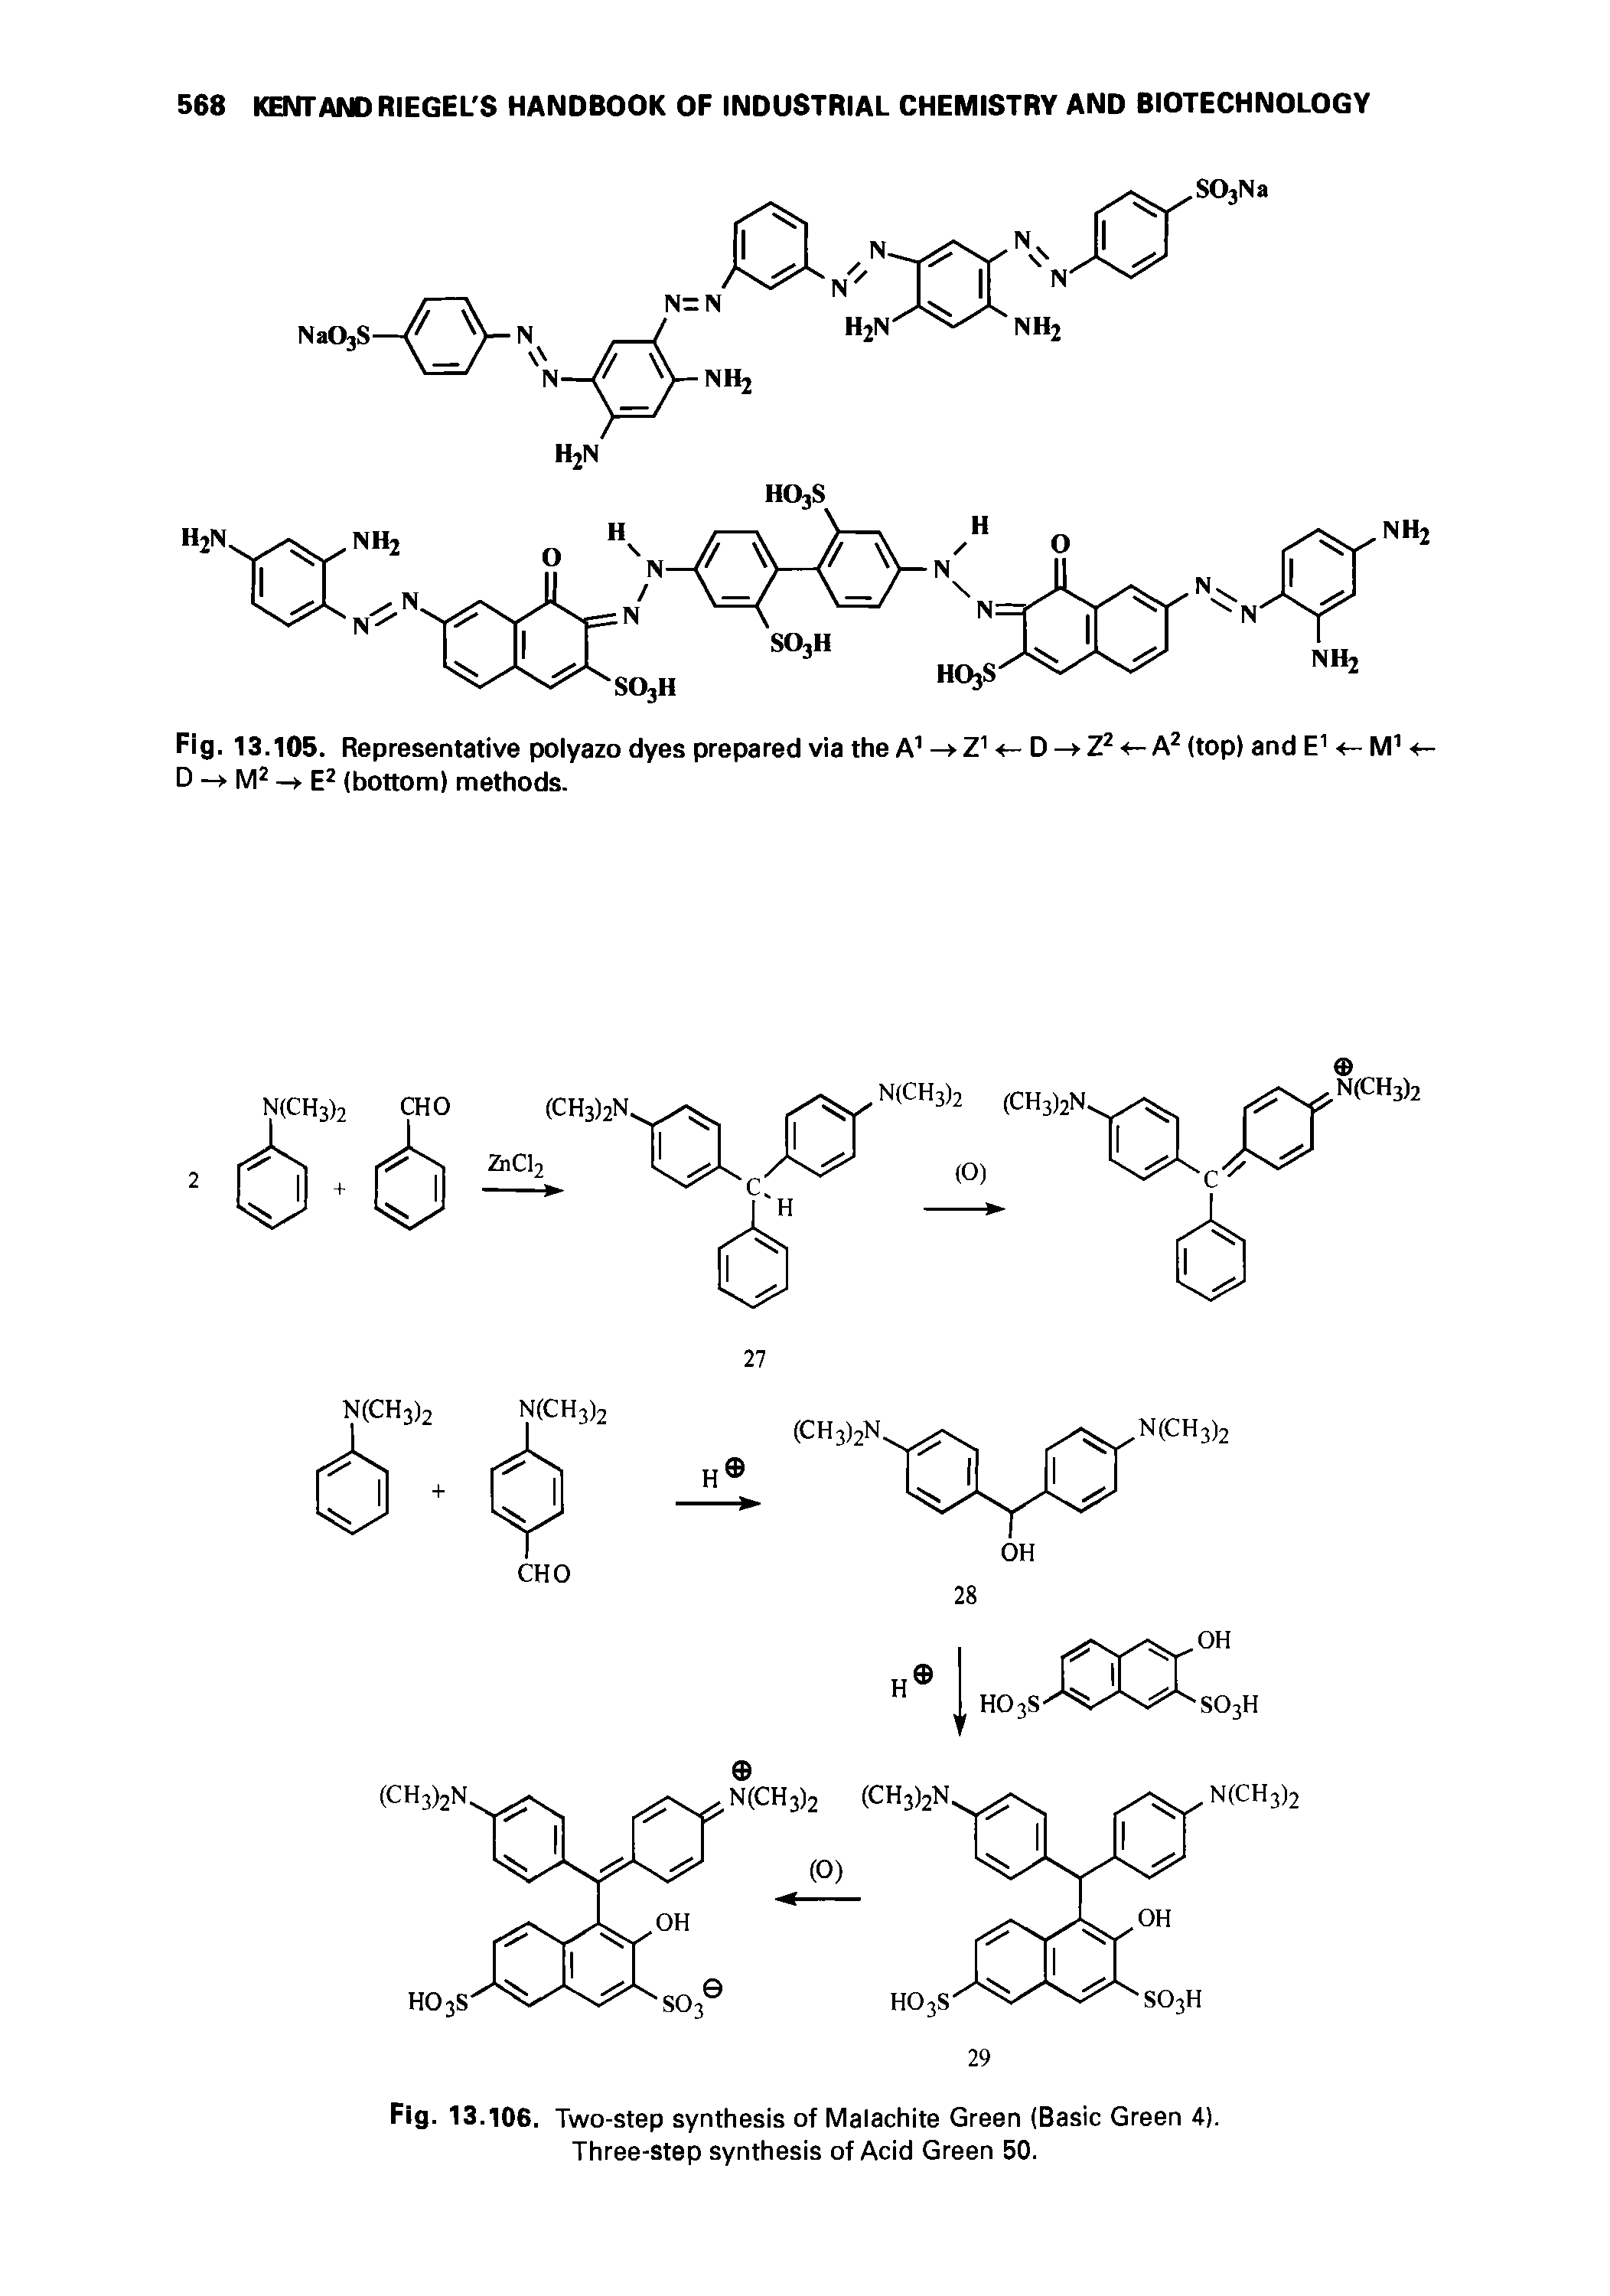 Fig. 13.106. Two-step synthesis of Malachite Green (Basic Green 4). Three-step synthesis of Acid Green 50.